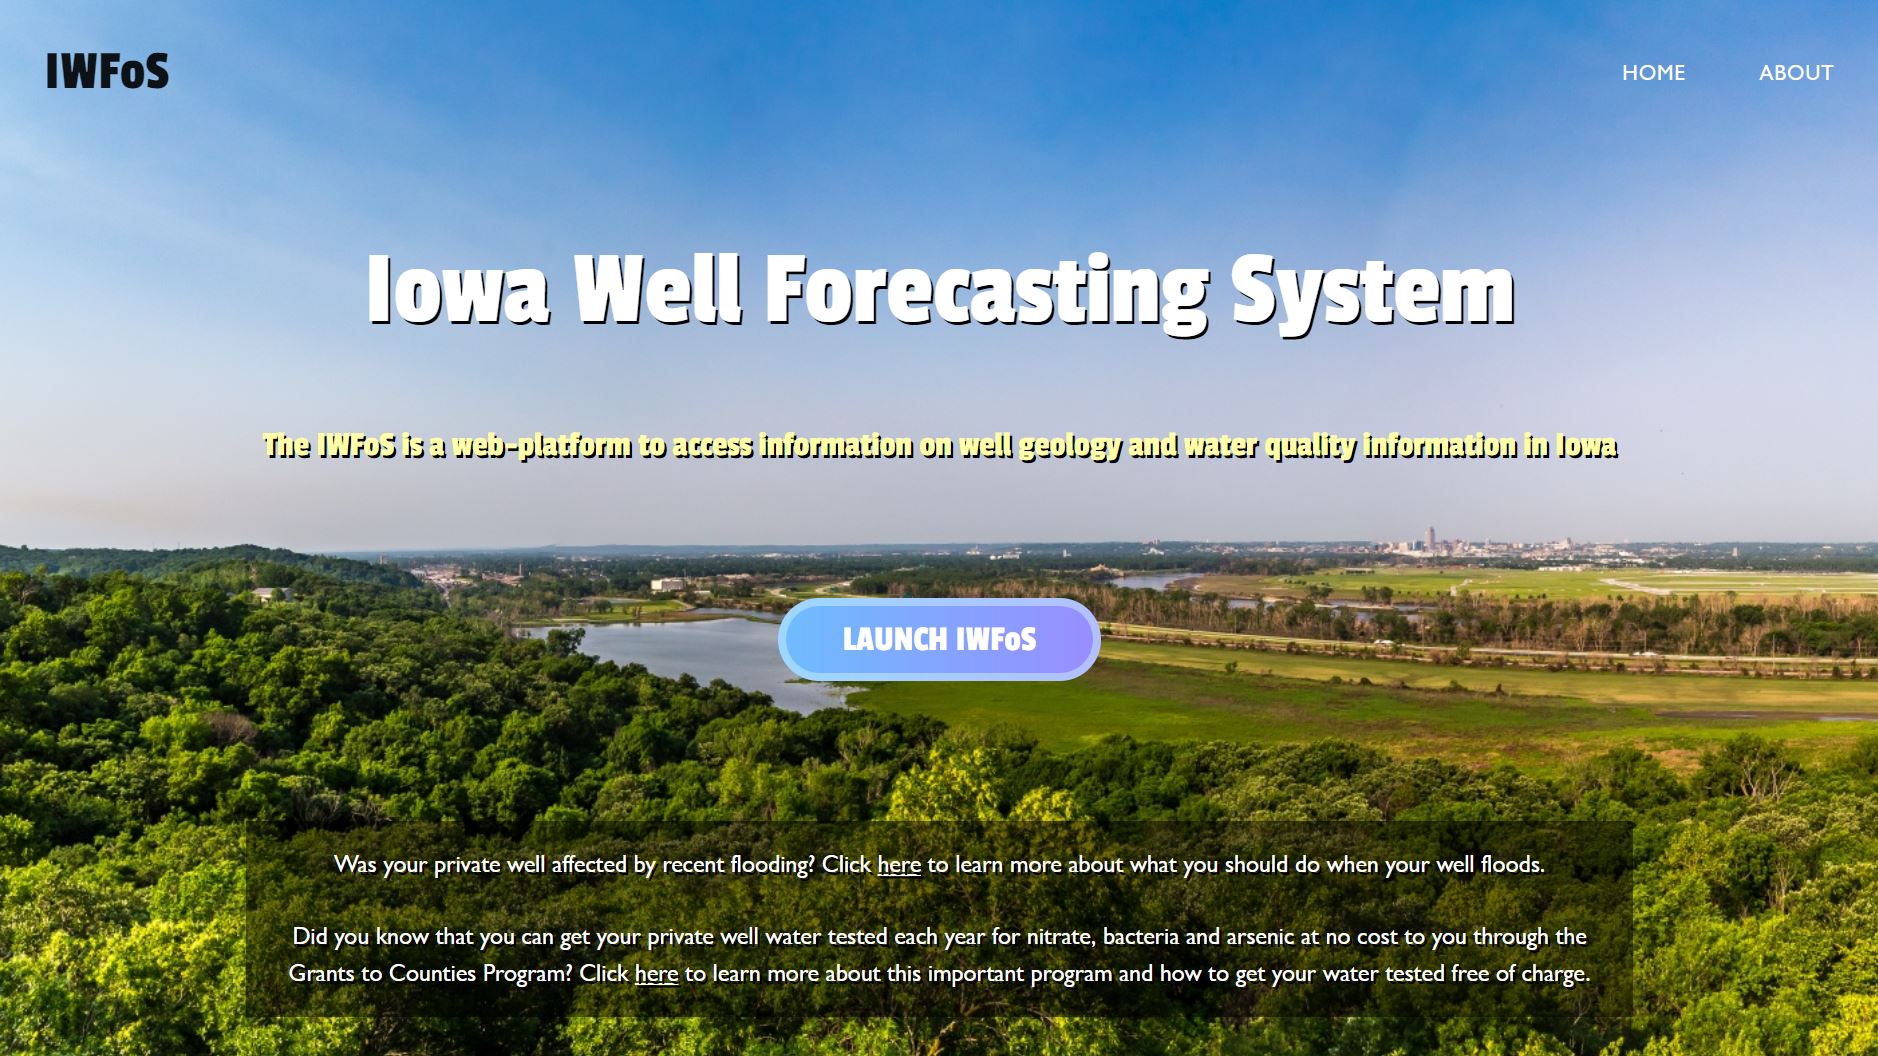 Iowa Well Forecasting System website image.